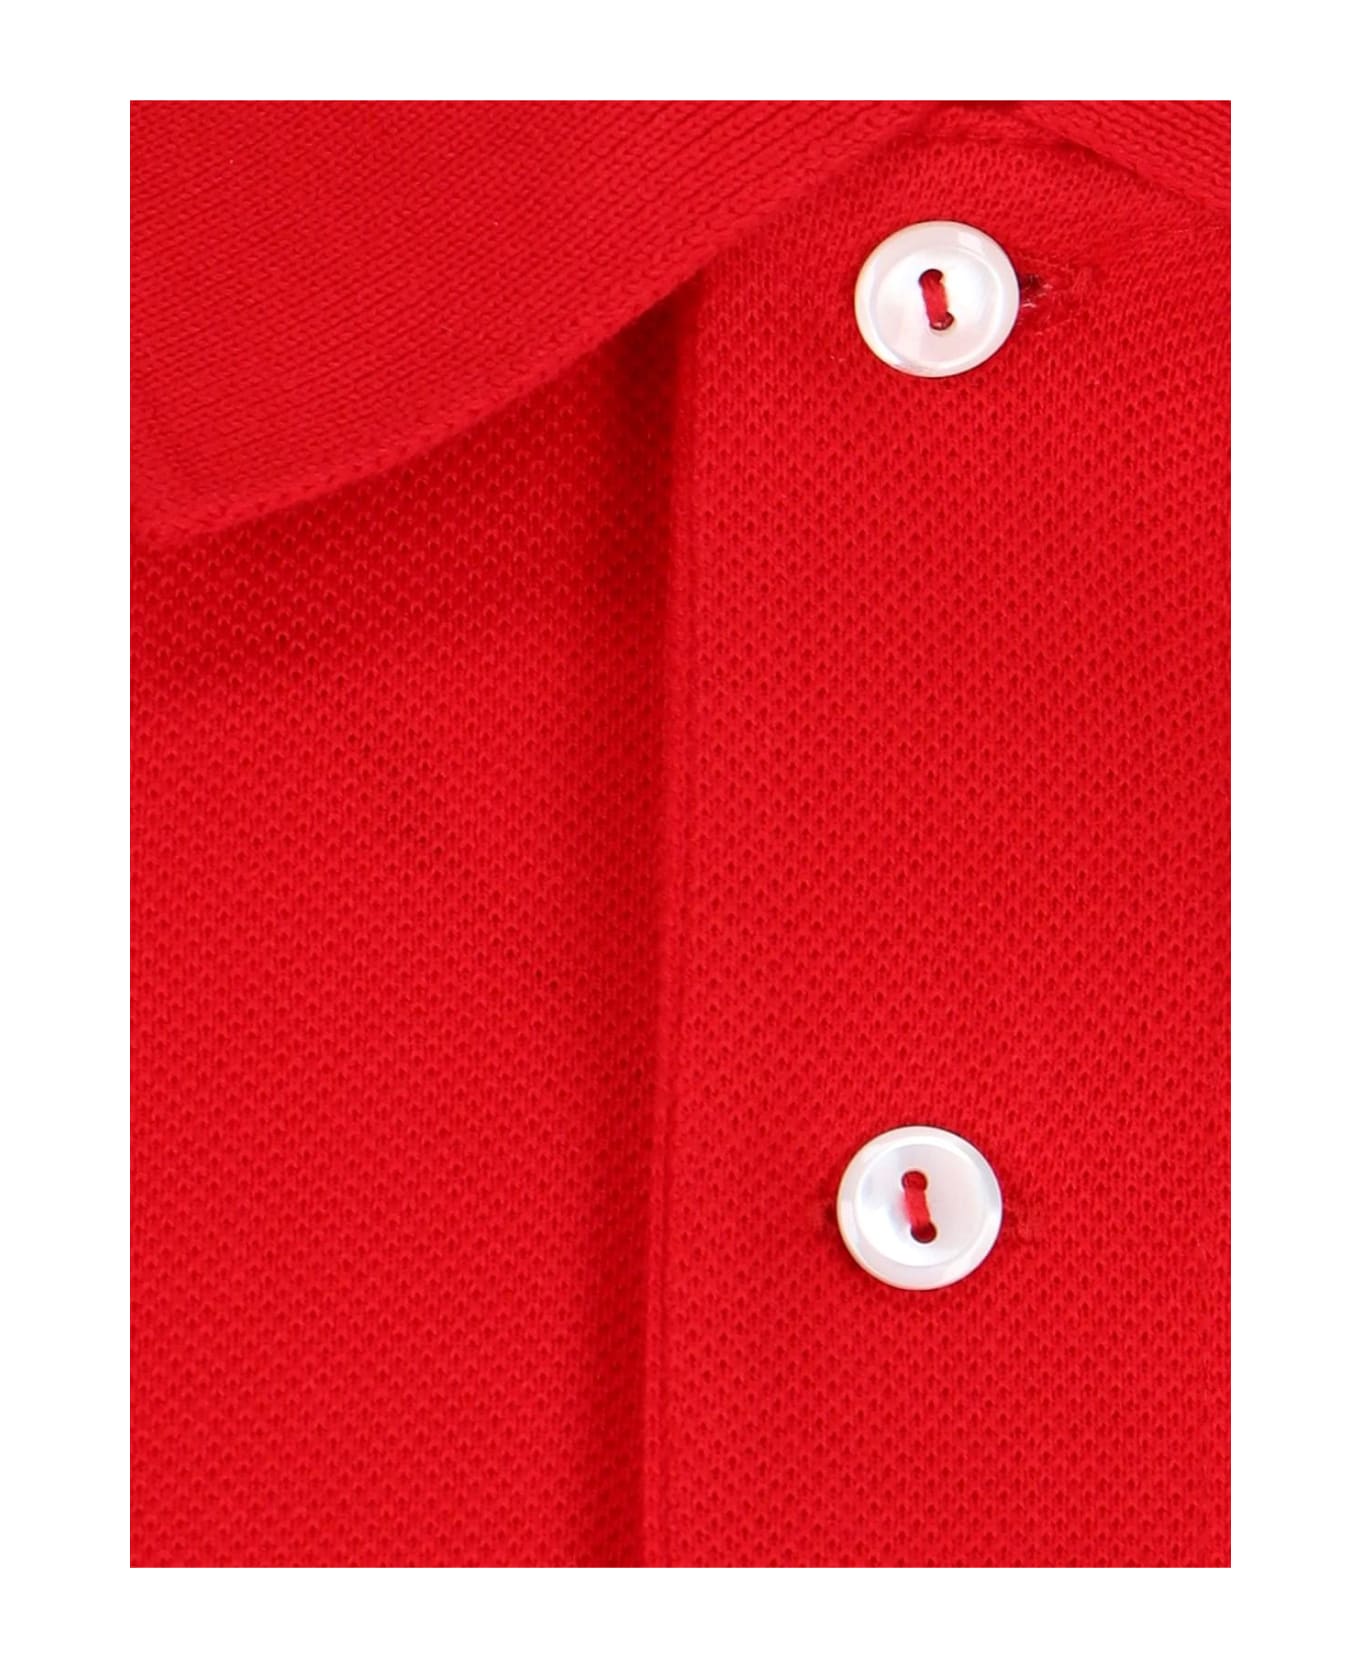 Lacoste 'l.12.12' Polo Shirt - Red